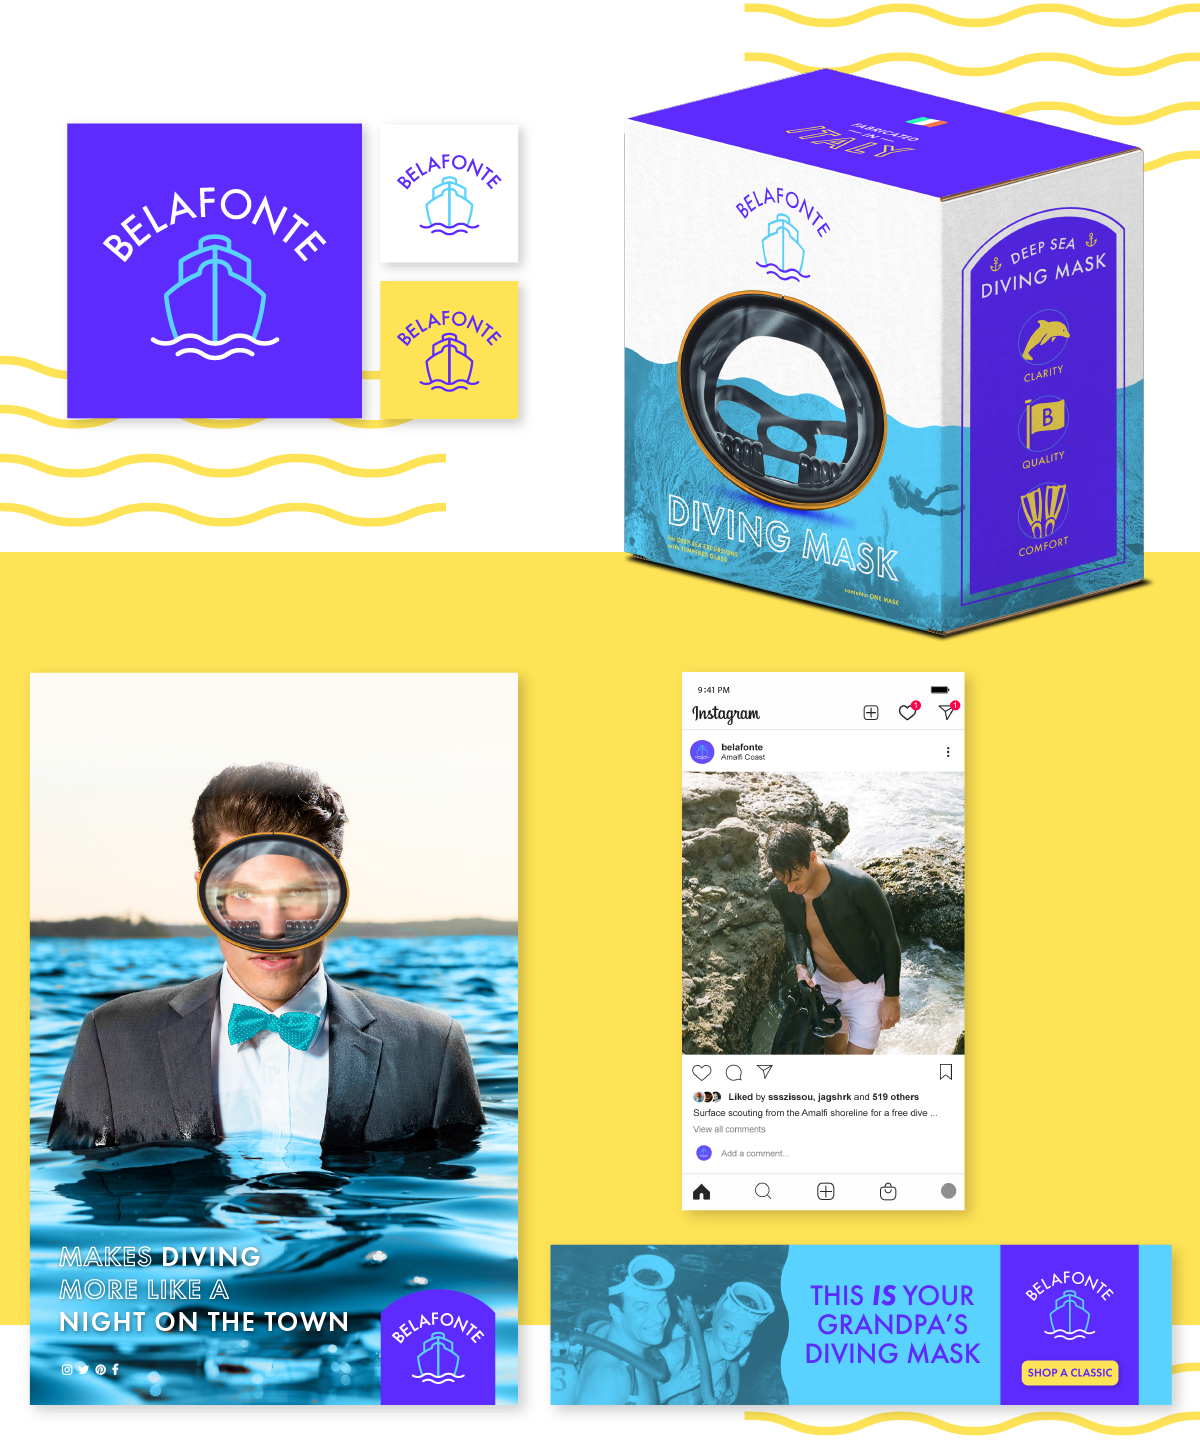 Logo design, packaging, print ad, web ad, and social media designs for a diving mask retail brand.